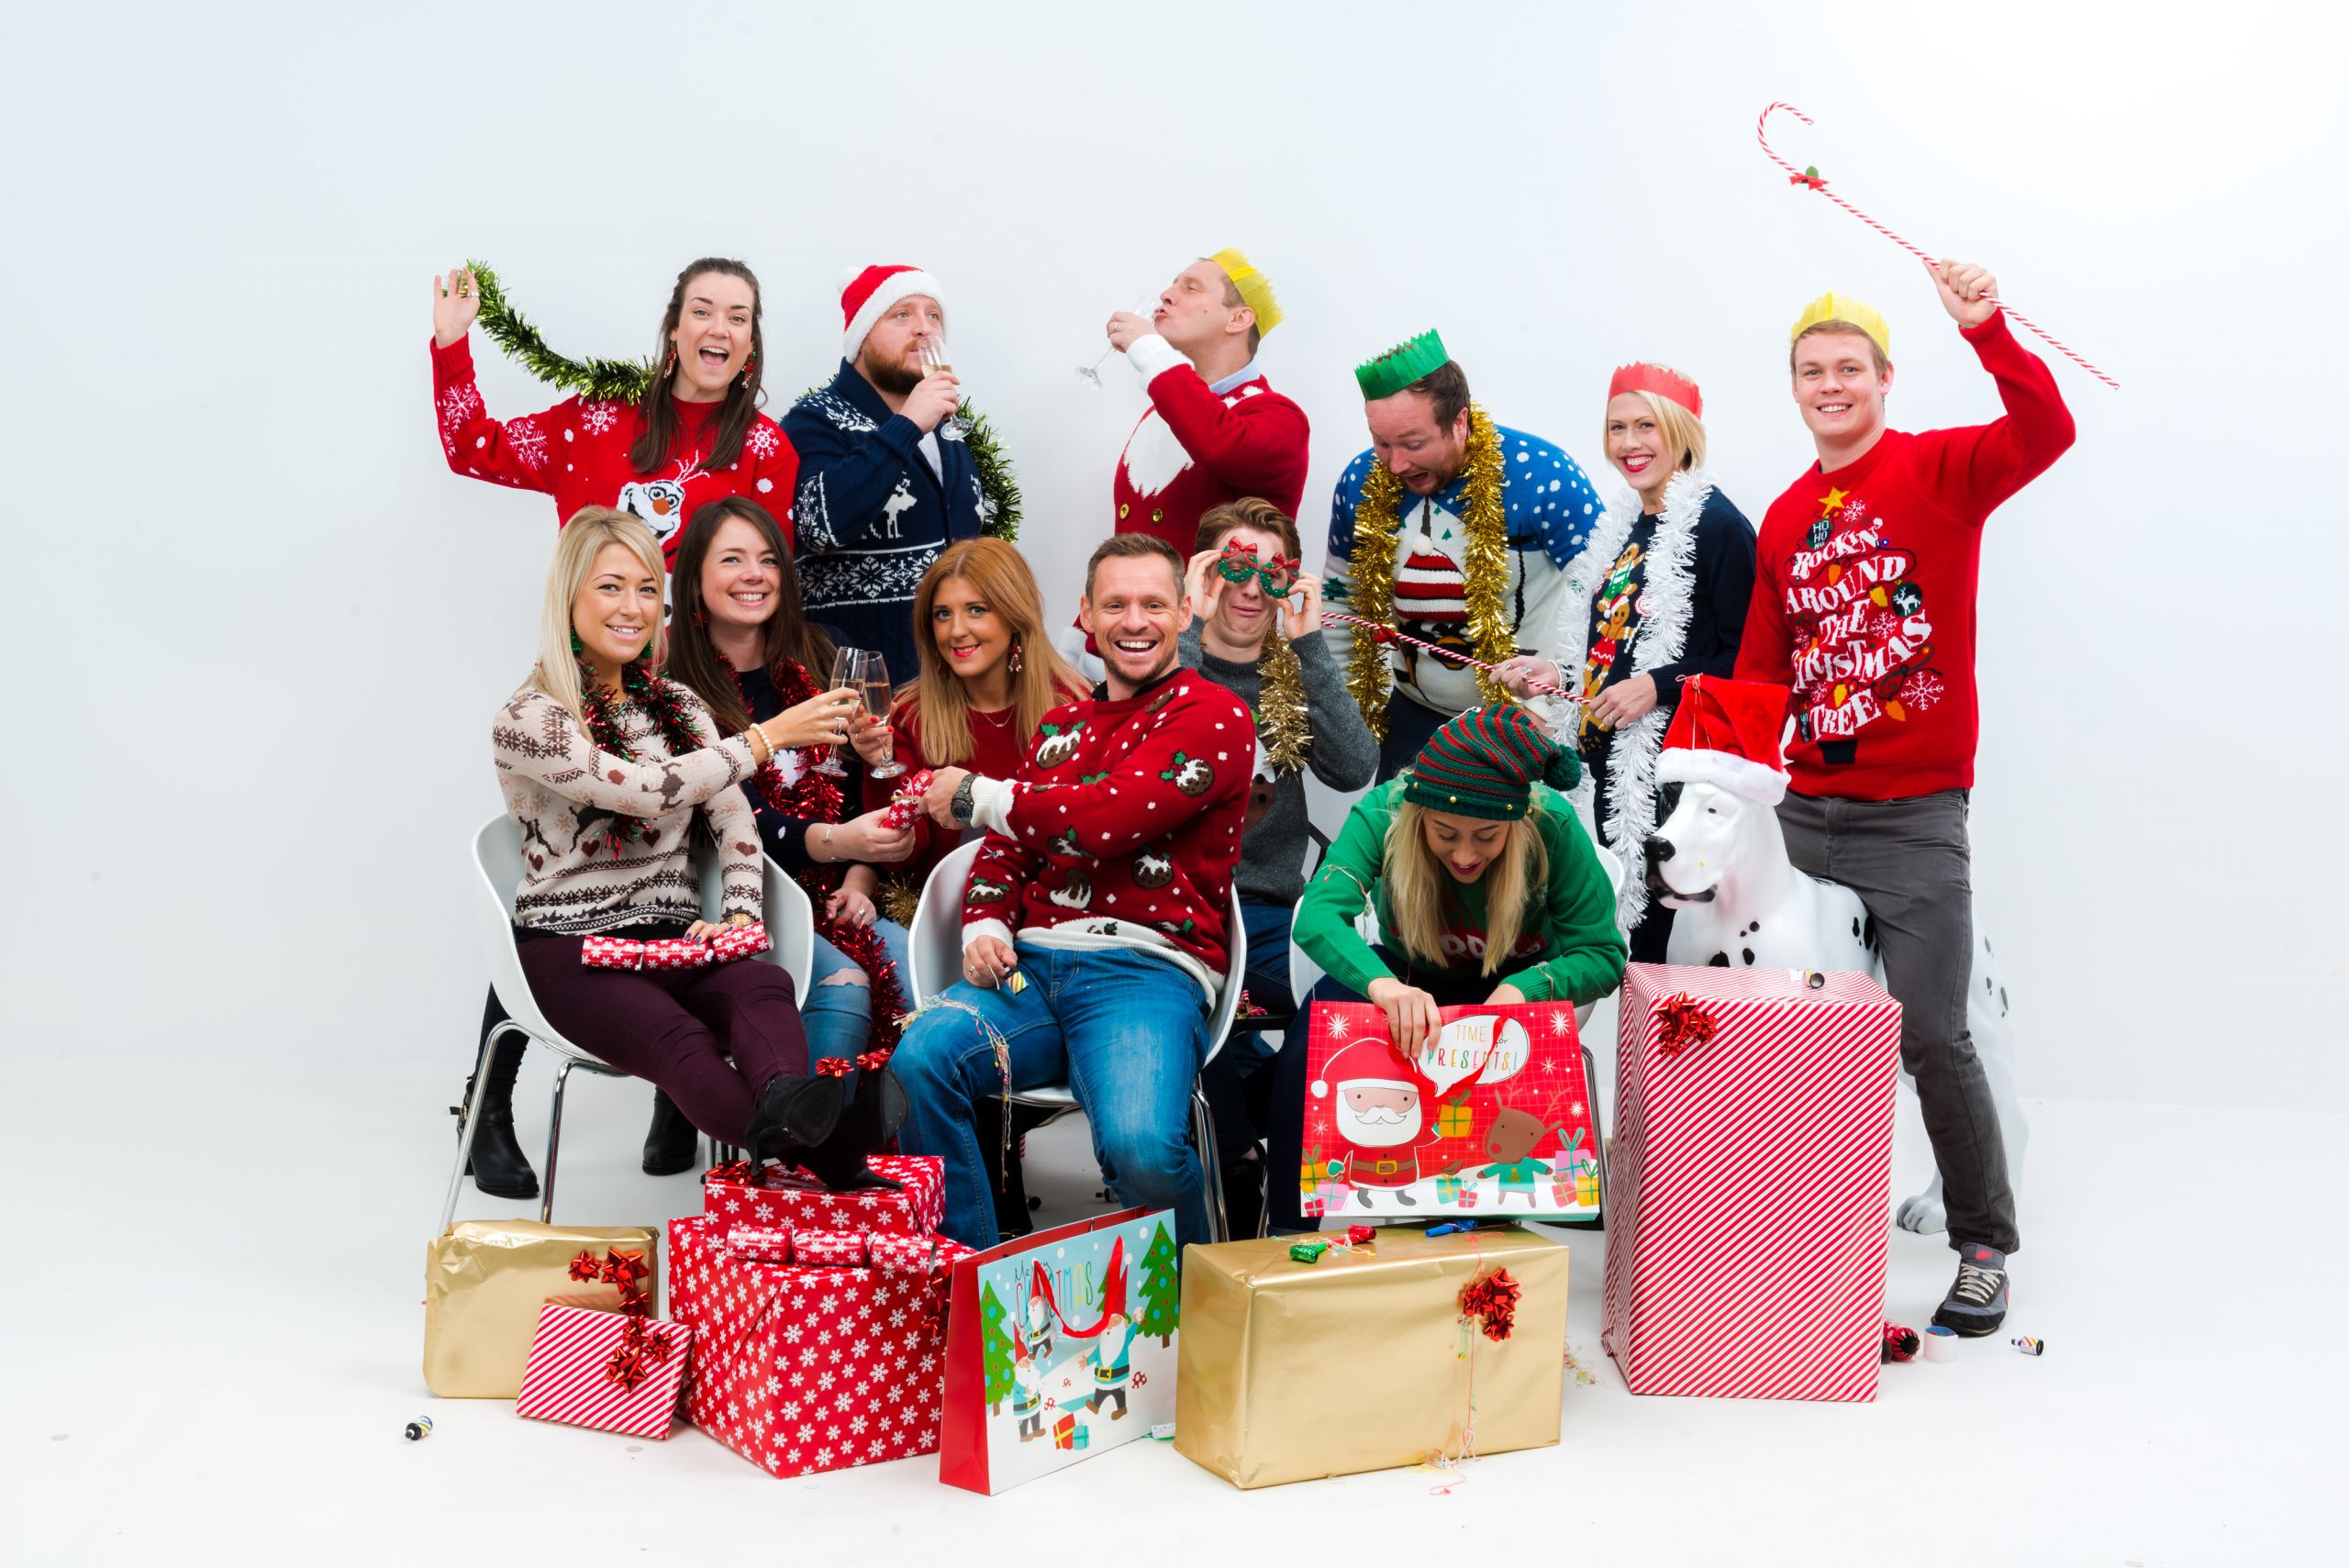 The staff of We Are Boutique looking joyus in christmas jumpers opening presents